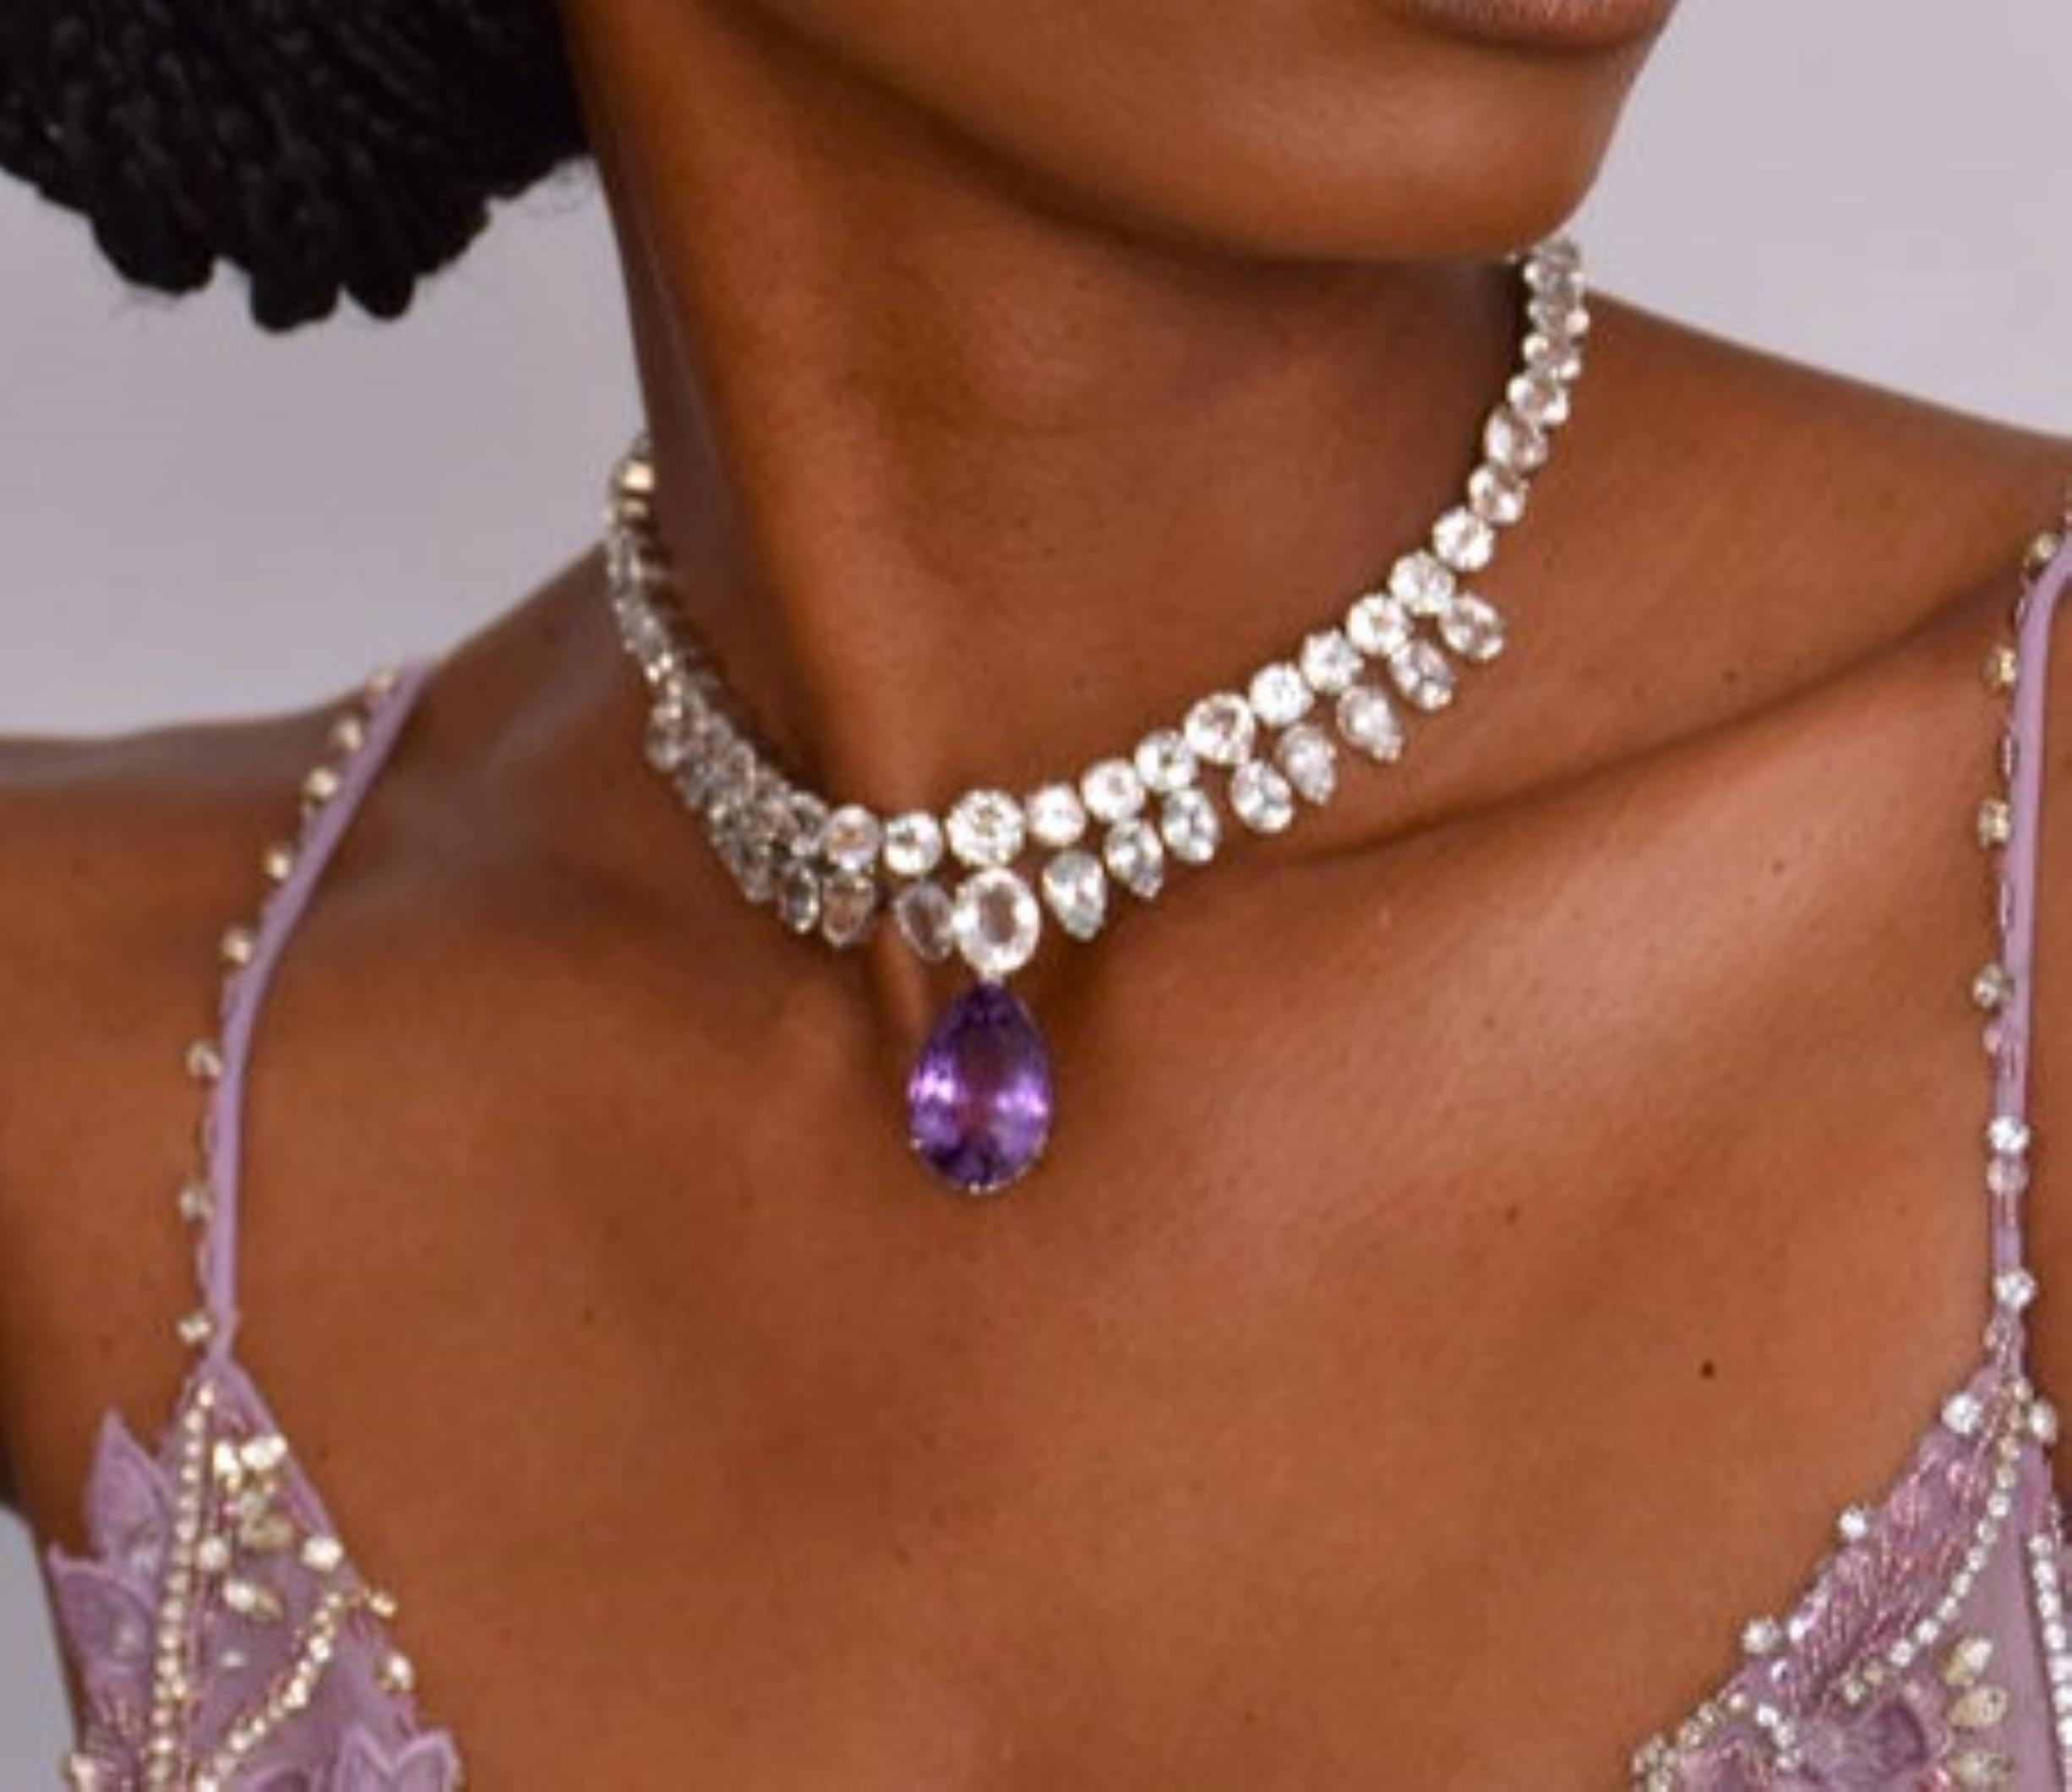 Elevate your jewelry collection with our exquisite Pear Cut Amethyst and Topaz Necklace. At the heart of this stunning necklace lies a captivating 10ct pear-cut amethyst gemstone, radiating with its enchanting purple hue. Surrounding the amethyst